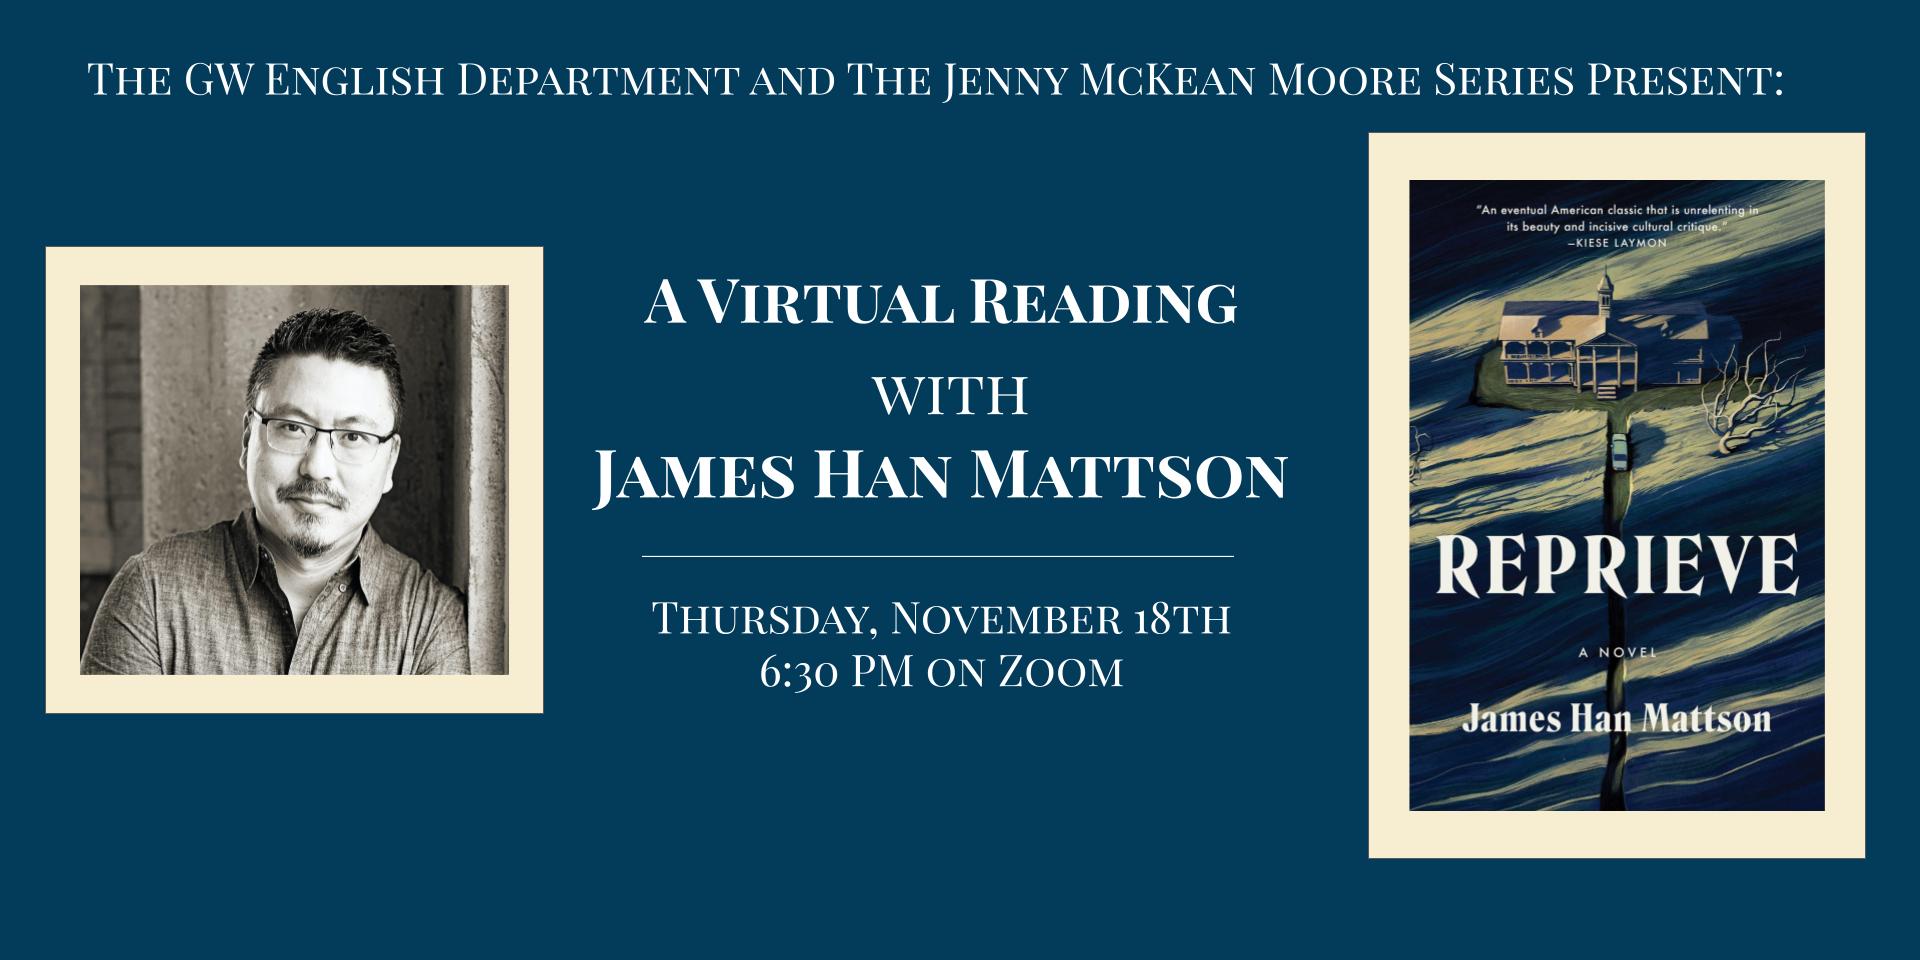 A poster showing a photo of author James Han Mattson and the cover of his novel reprieve. Mattson is of Korean descent, has short black hair and wears glasses. The cover for the novel is a painting from the aerial view, showing a large, ominous house and a car approaching it on a pathway.